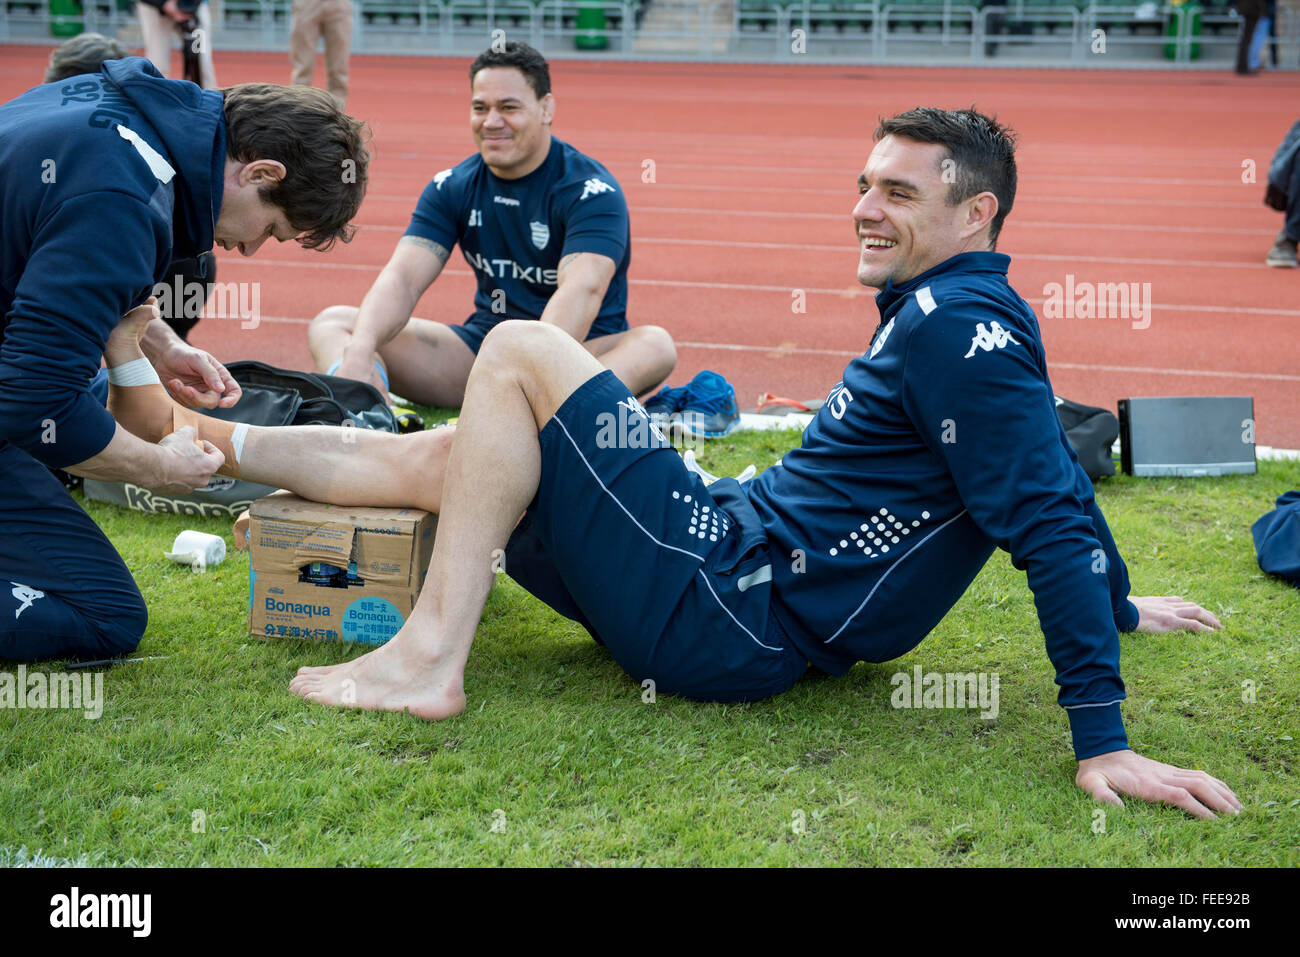 Hong Kong, Hong Kong S.A.R, China. 5th Feb, 2016. DAN CARTER of the French Rugby union team RACING 92's gets strapped for the last practice session ahead of their clash with New Zealand team, The Highlanders. Racing 92 take the chance to practise on the pitch they will play on in the upcoming match in Hong Kong. They are playing at Sui Sai Wan sports ground in Chai Wan. © Jayne Russell/ZUMA Wire/Alamy Live News Stock Photo